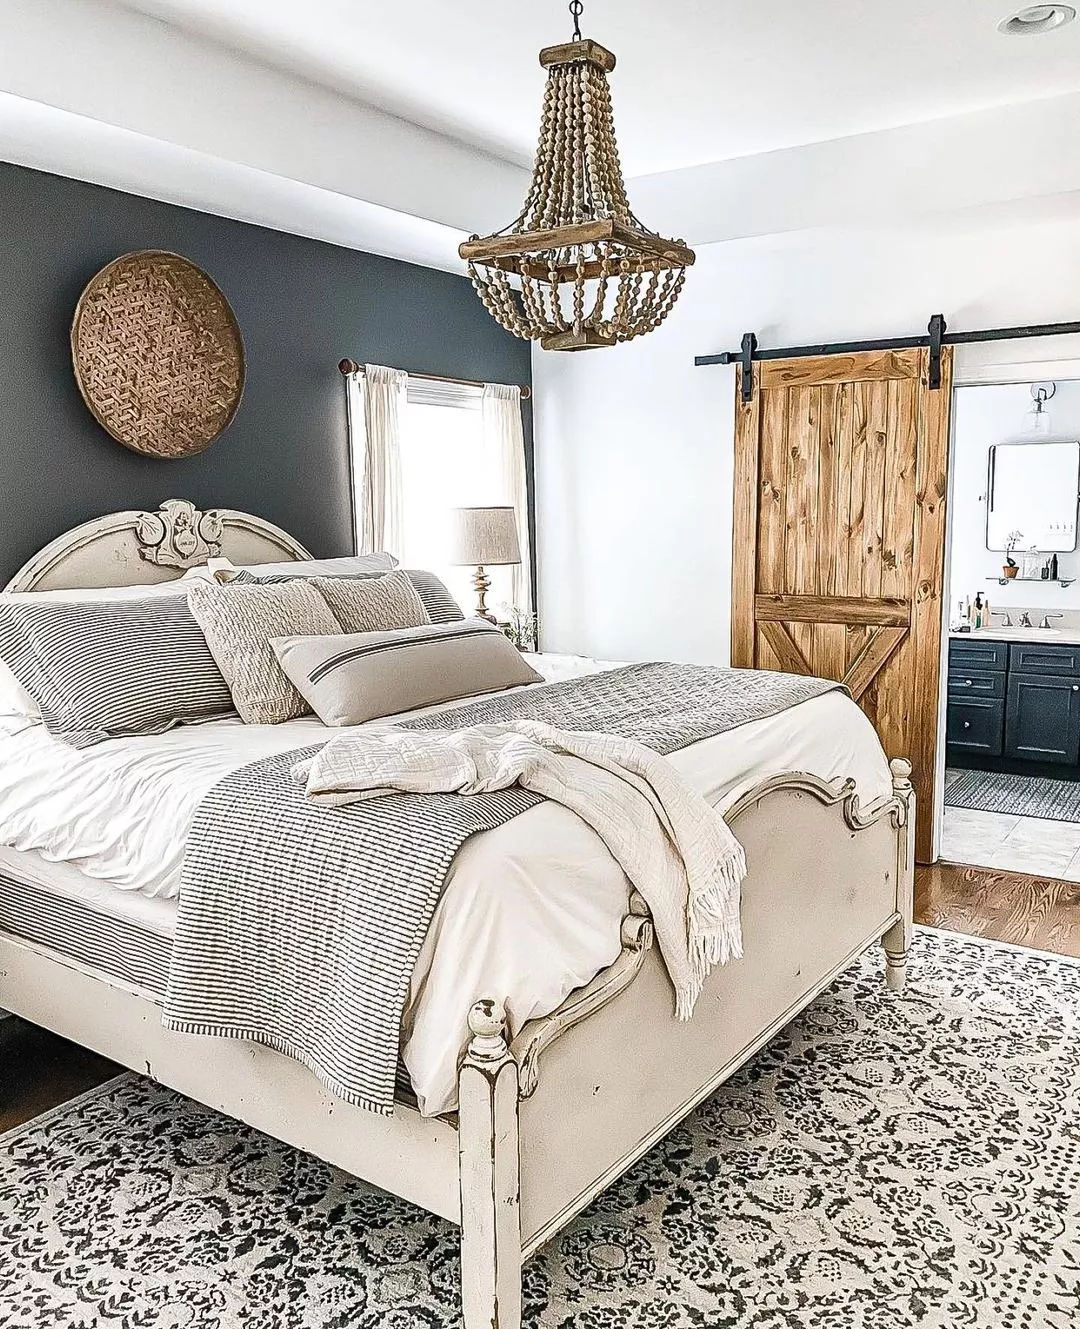 https://www.extraspace.com/blog/wp-content/uploads/2021/01/bedroom-styling-and-decorating-tips-select-the-right-bed.jpg.webp